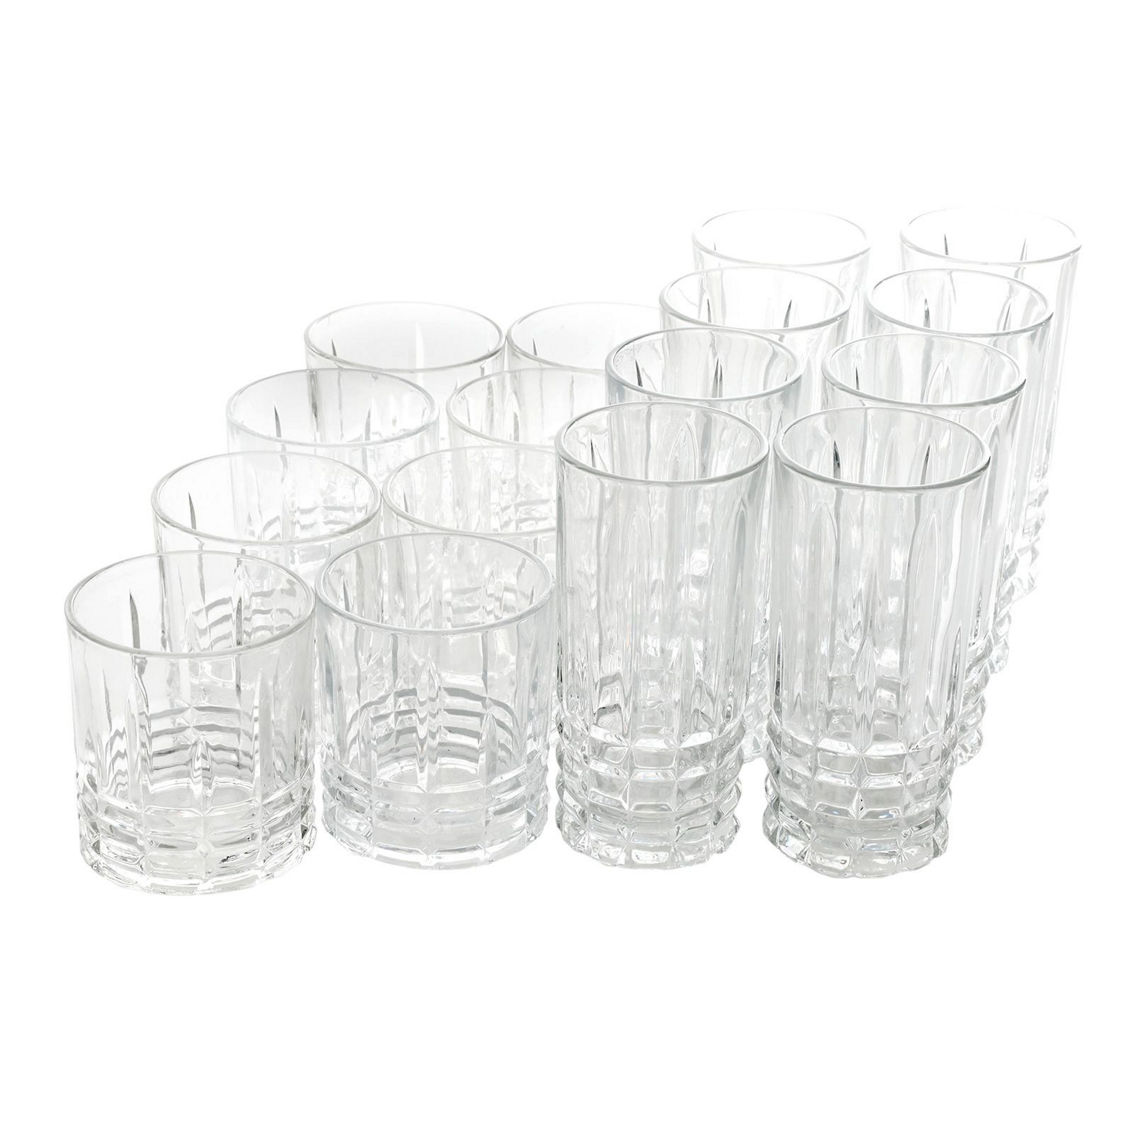 Gibson Home Jewelite 16 Piece Tumbler and Double Old Fashioned Glass Set - Image 2 of 5